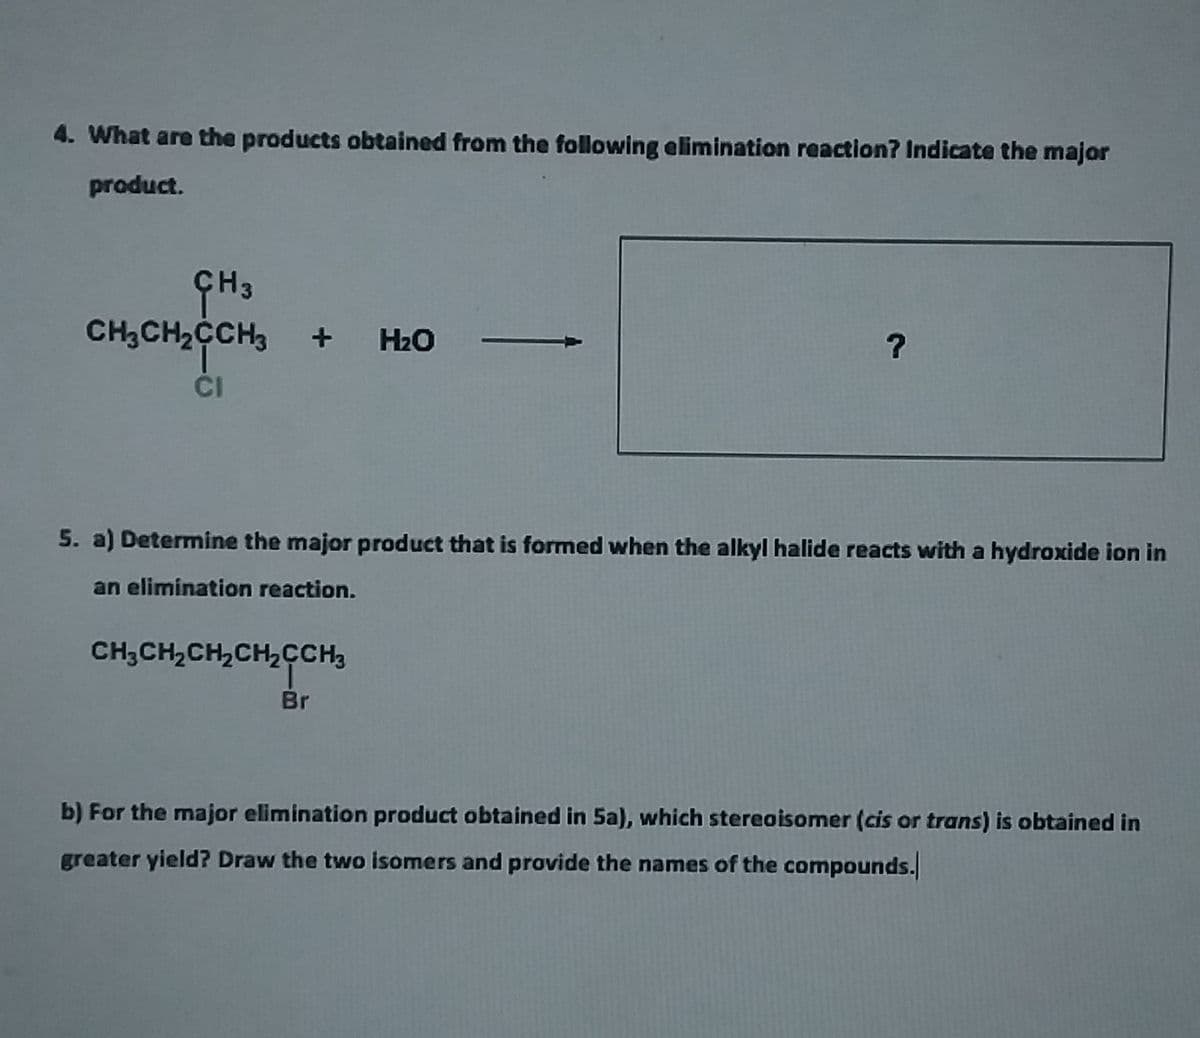 4. What are the products obtained from the following elimination reaction? Indicate the major
product.
CH;CH2CCH3
H2O
CI
5. a) Determine the major product that is formed when the alkyl halide reacts with a hydroxide ion in
an elimination reaction.
CH;CH,CH,CH,CCH3
Br
b) For the major elimination product obtained in 5a), which stereoisomer (cis or trans) is obtained in
greater yield? Draw the two isomers and provide the names of the compounds.
